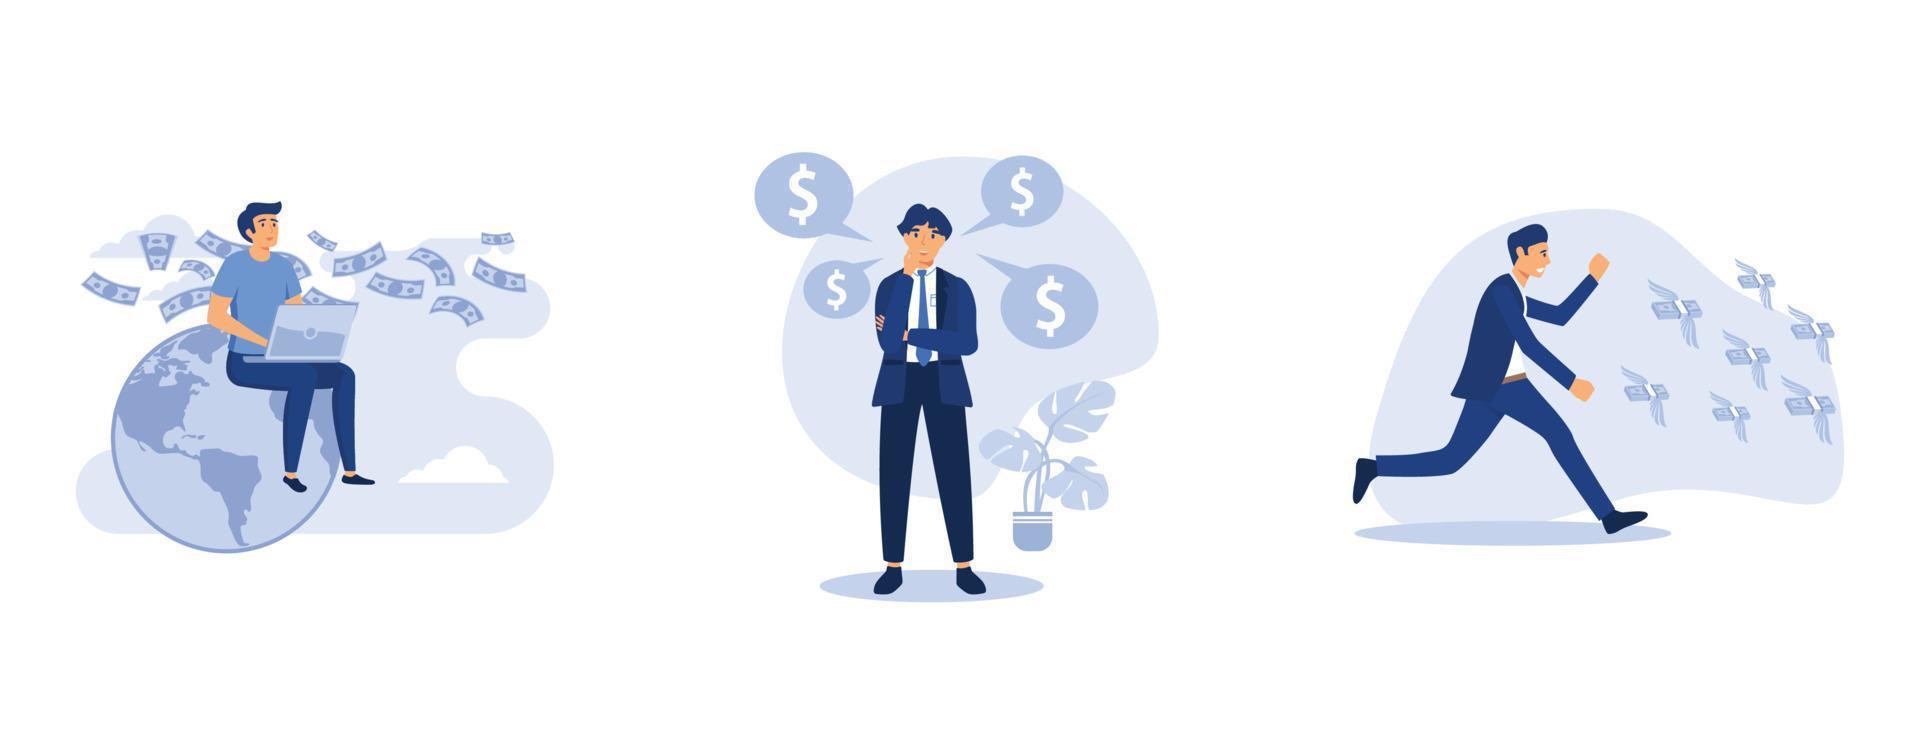 prepare a business project start up, the company is engaged in the joint construction and the cultivation of cash profits, Man running after cash money flying away, set flat vector modern illustration